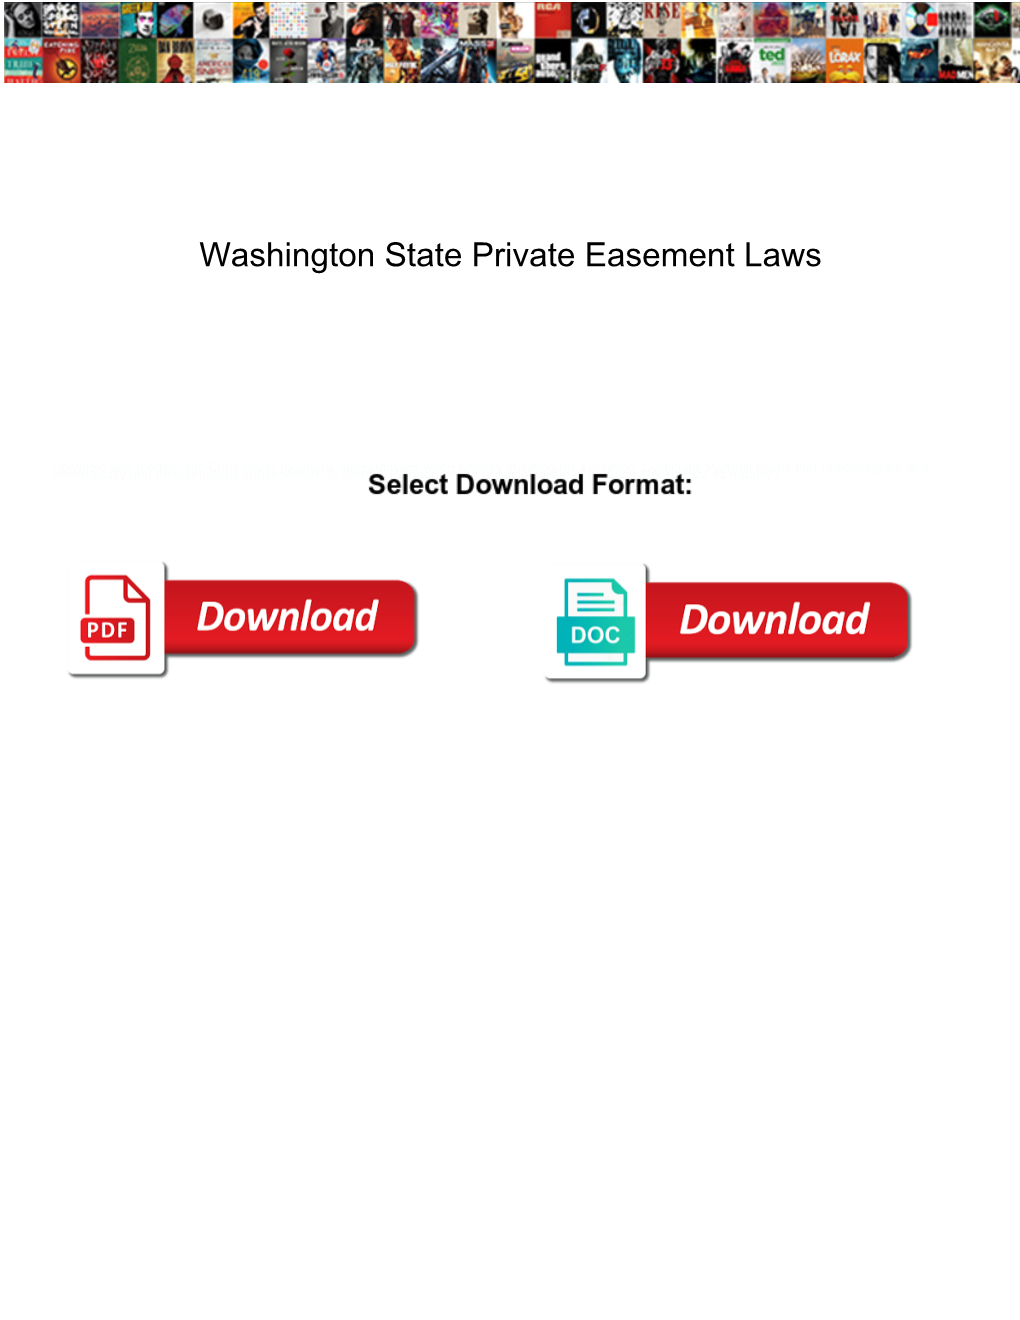 Washington State Private Easement Laws